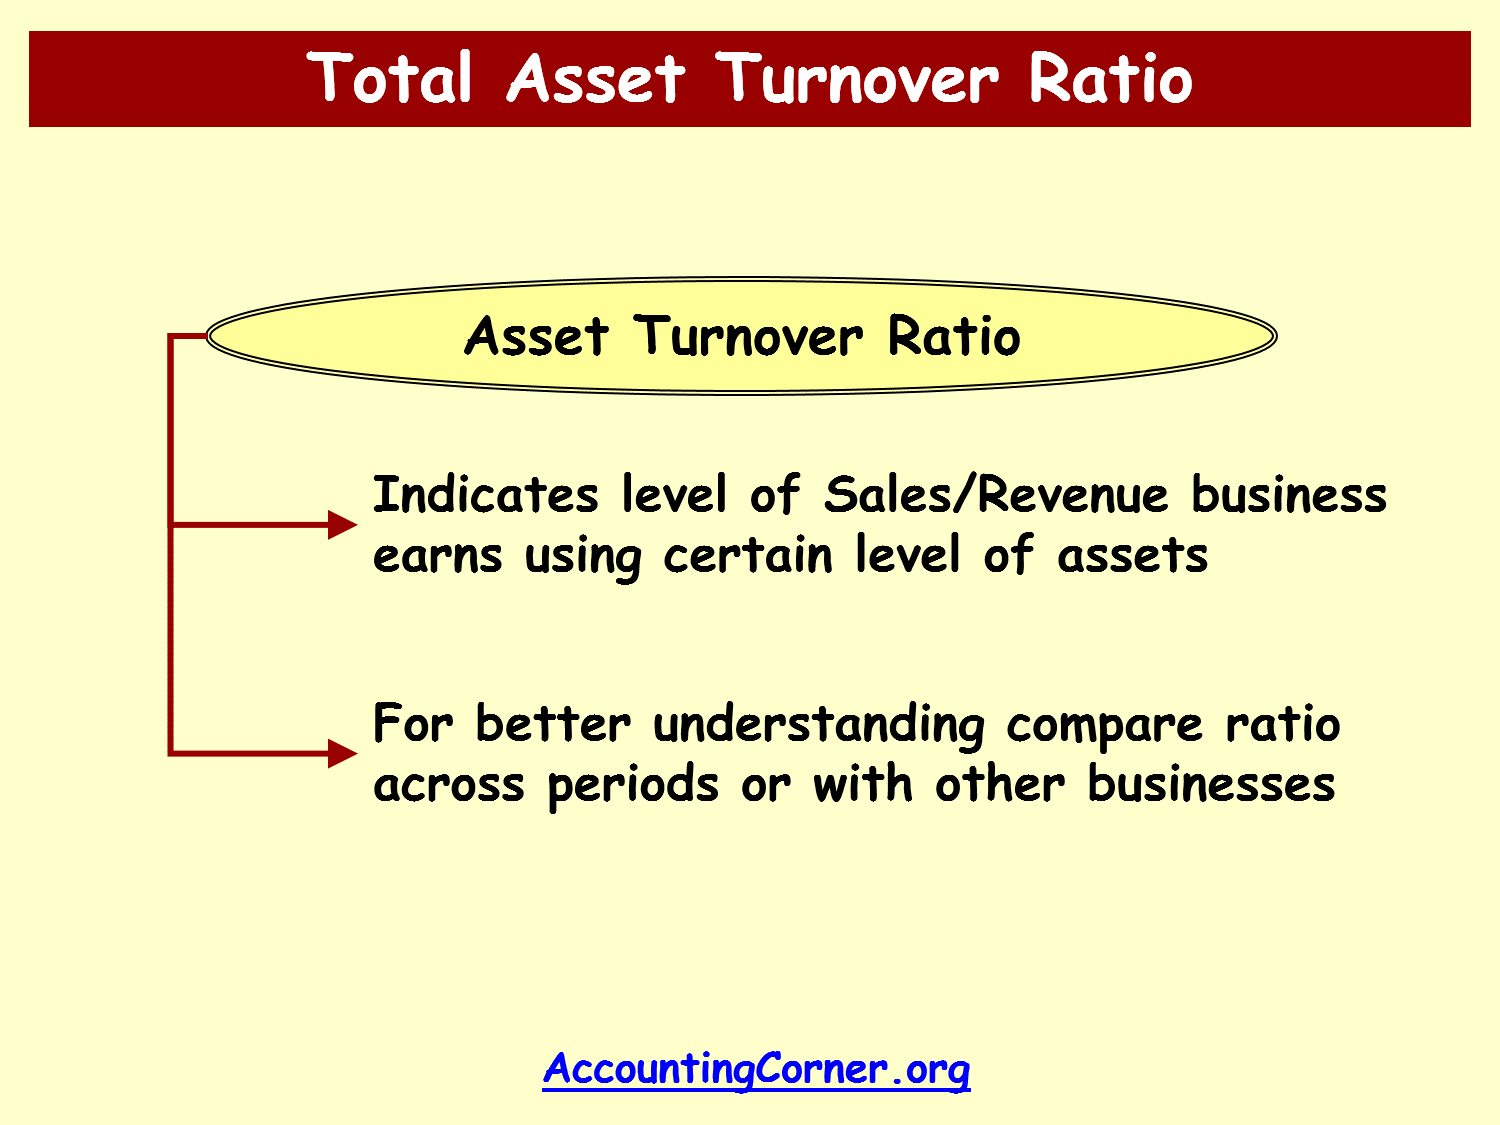 Assets turnover формула. Turnover ratio формула. Total Assets turnover ratio формула. Total Asset turnover формула.